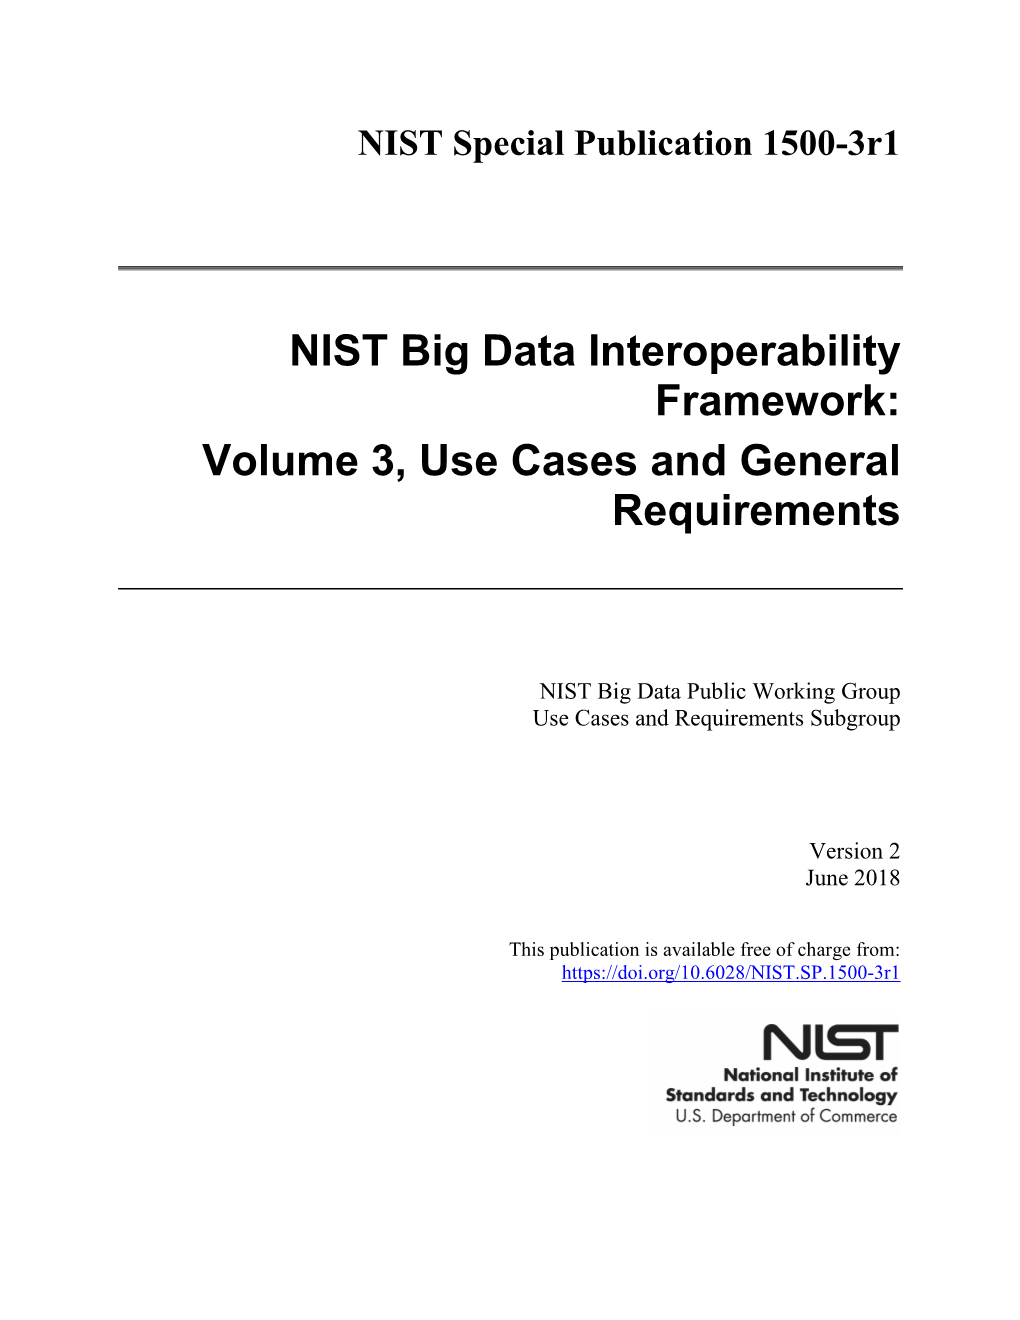 NIST Big Data Interoperability Framework: Volume 3, Use Cases and General Requirements